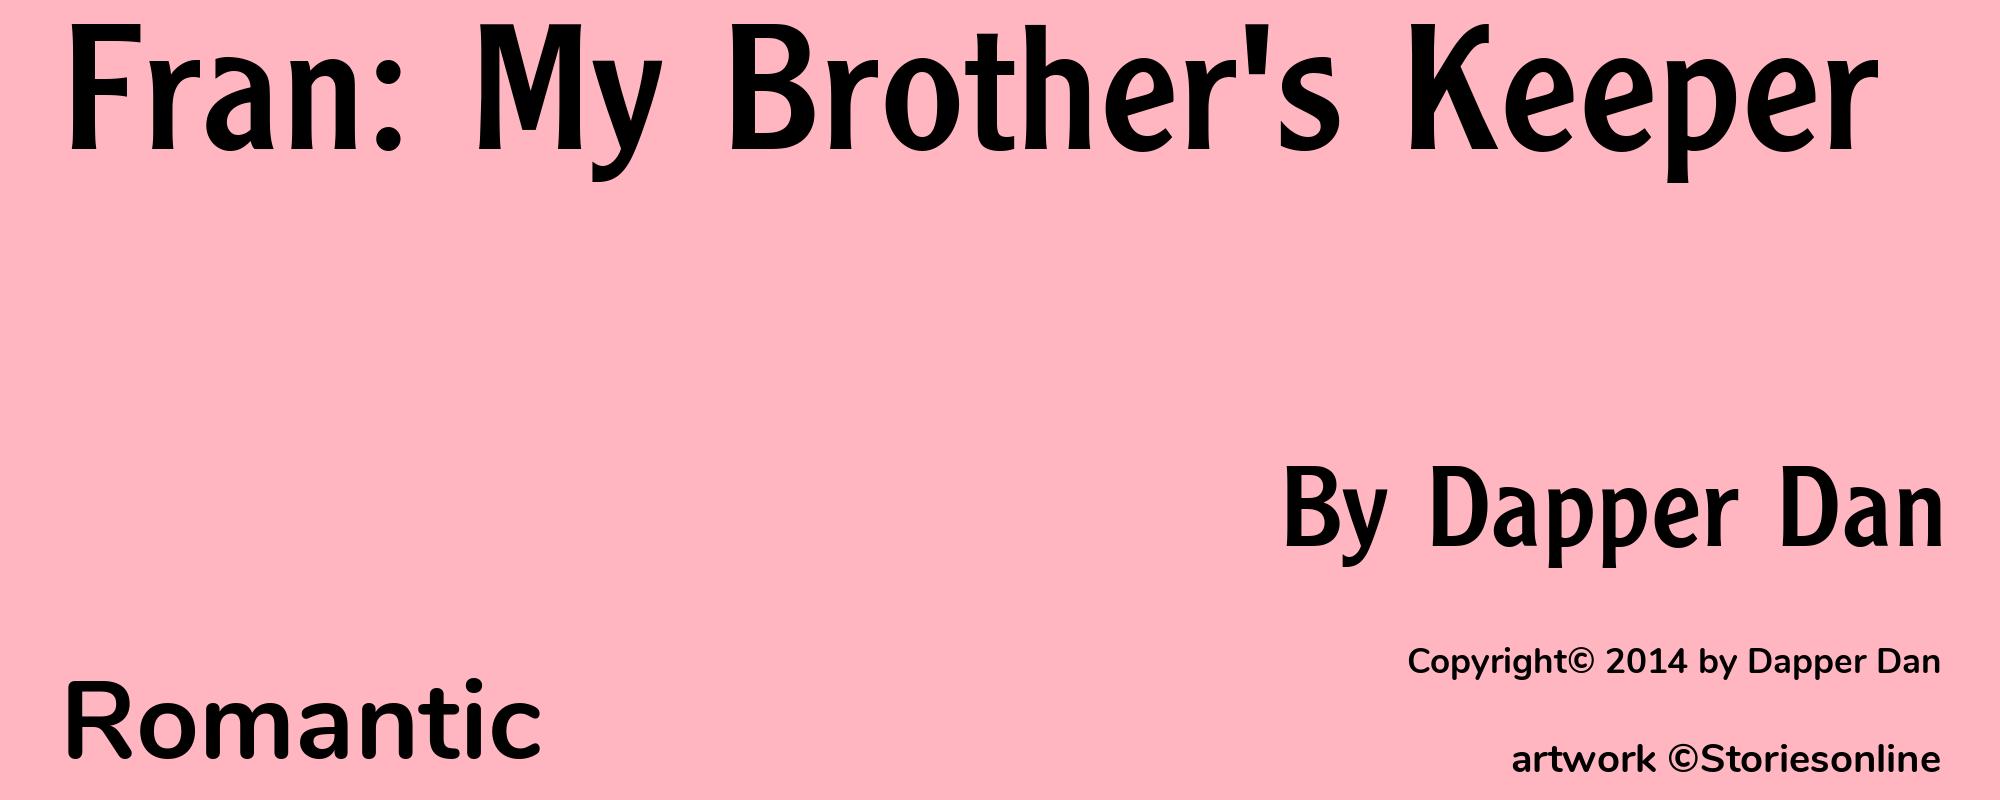 Fran: My Brother's Keeper - Cover